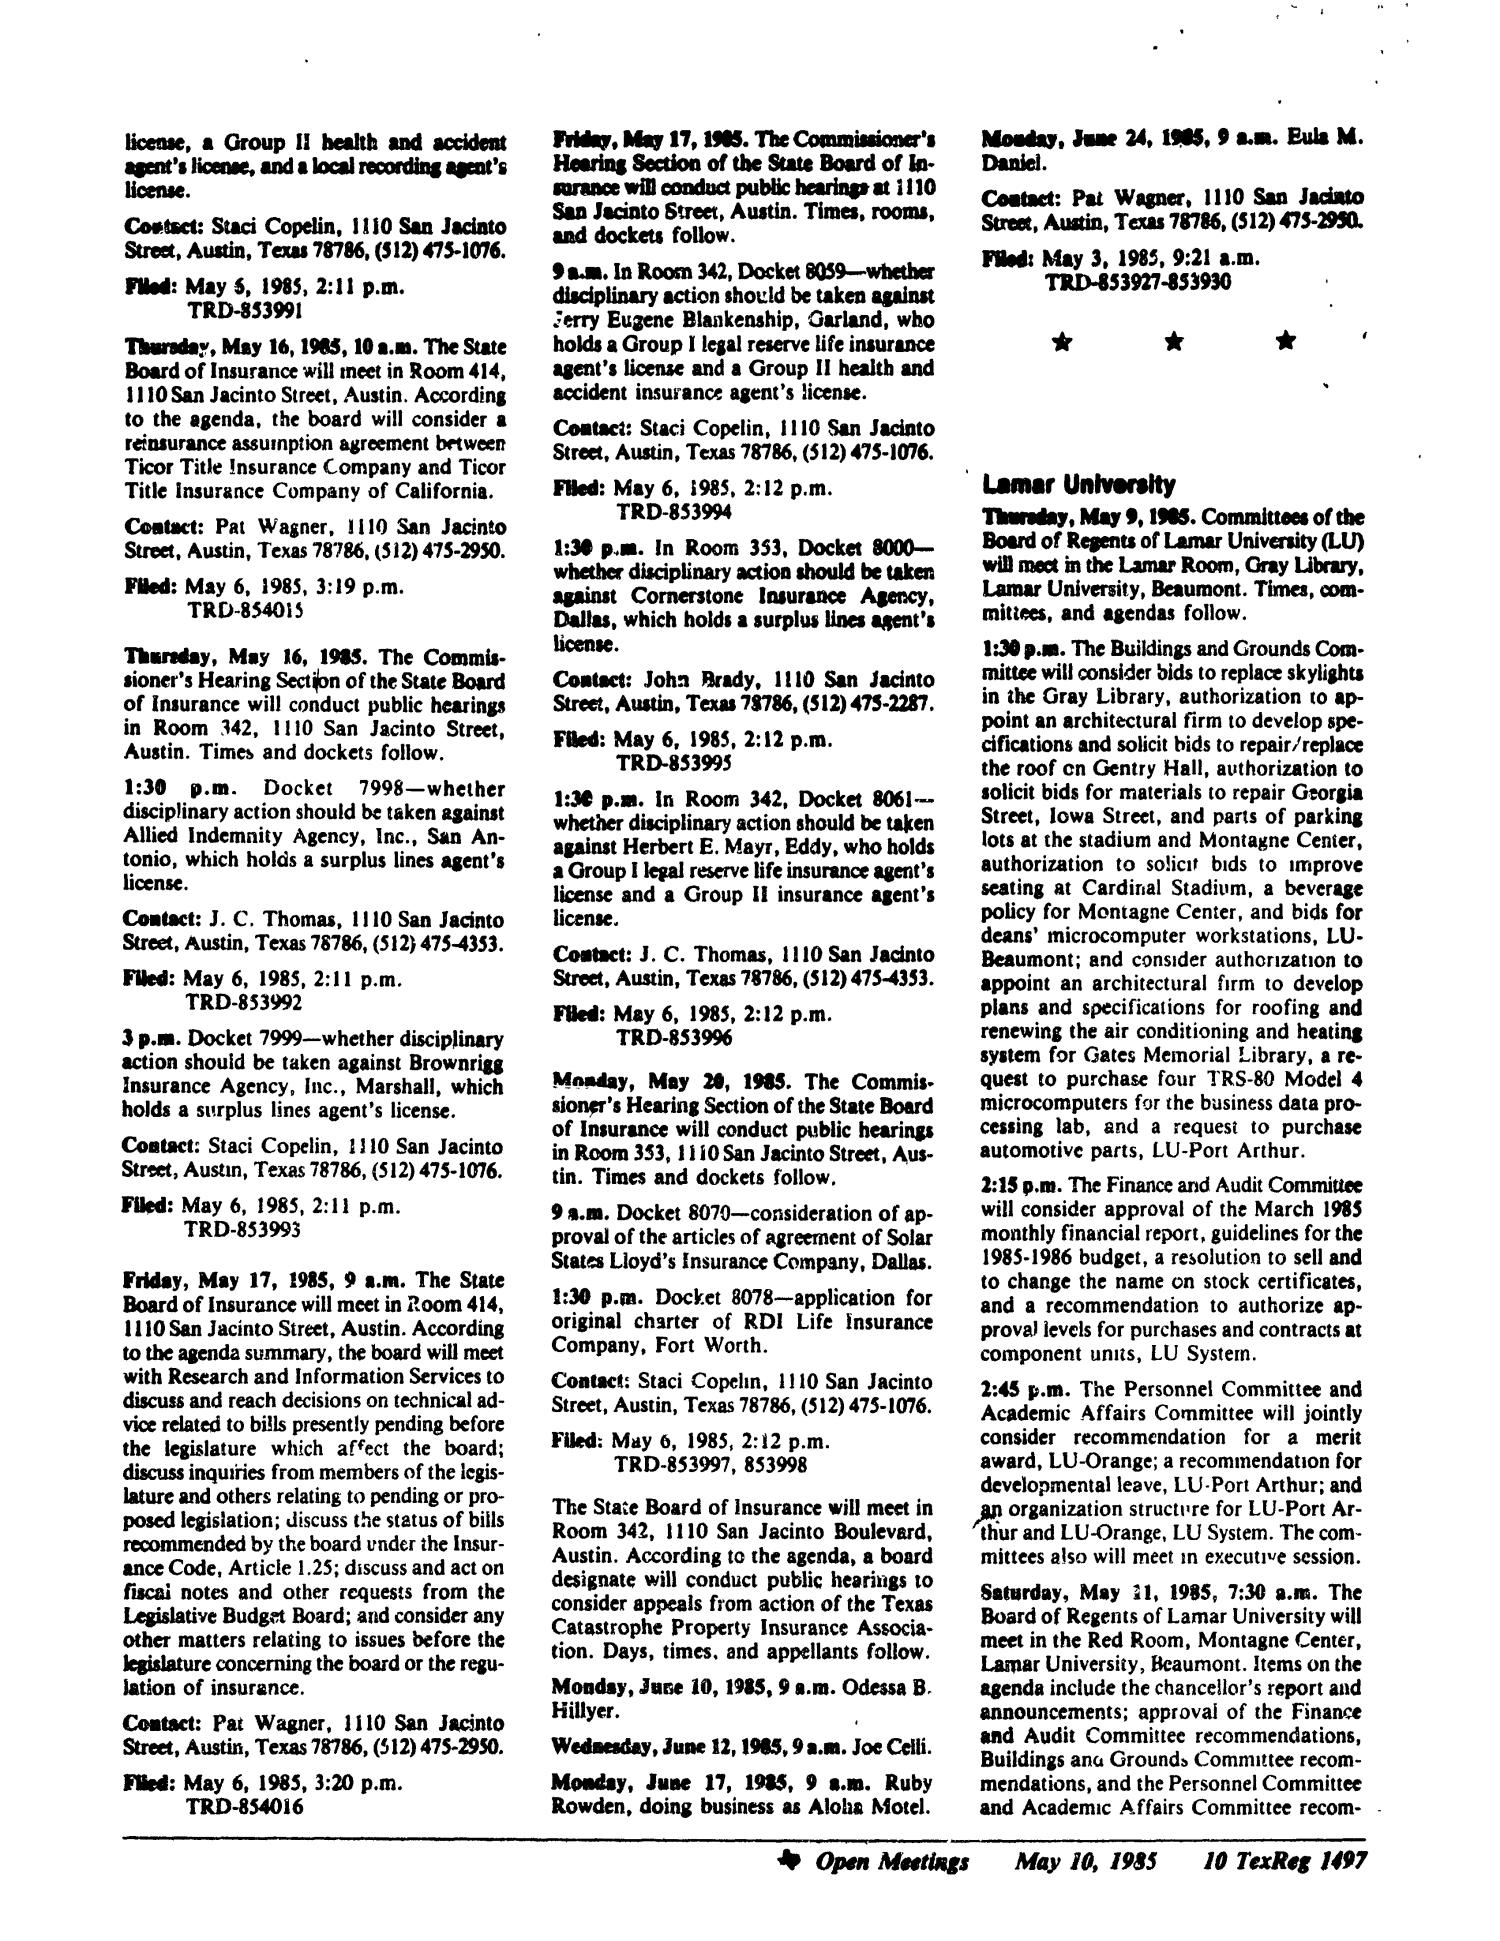 Texas Register, Volume 10, Number 36, Pages 1459-1518, May 10, 1985
                                                
                                                    1497
                                                